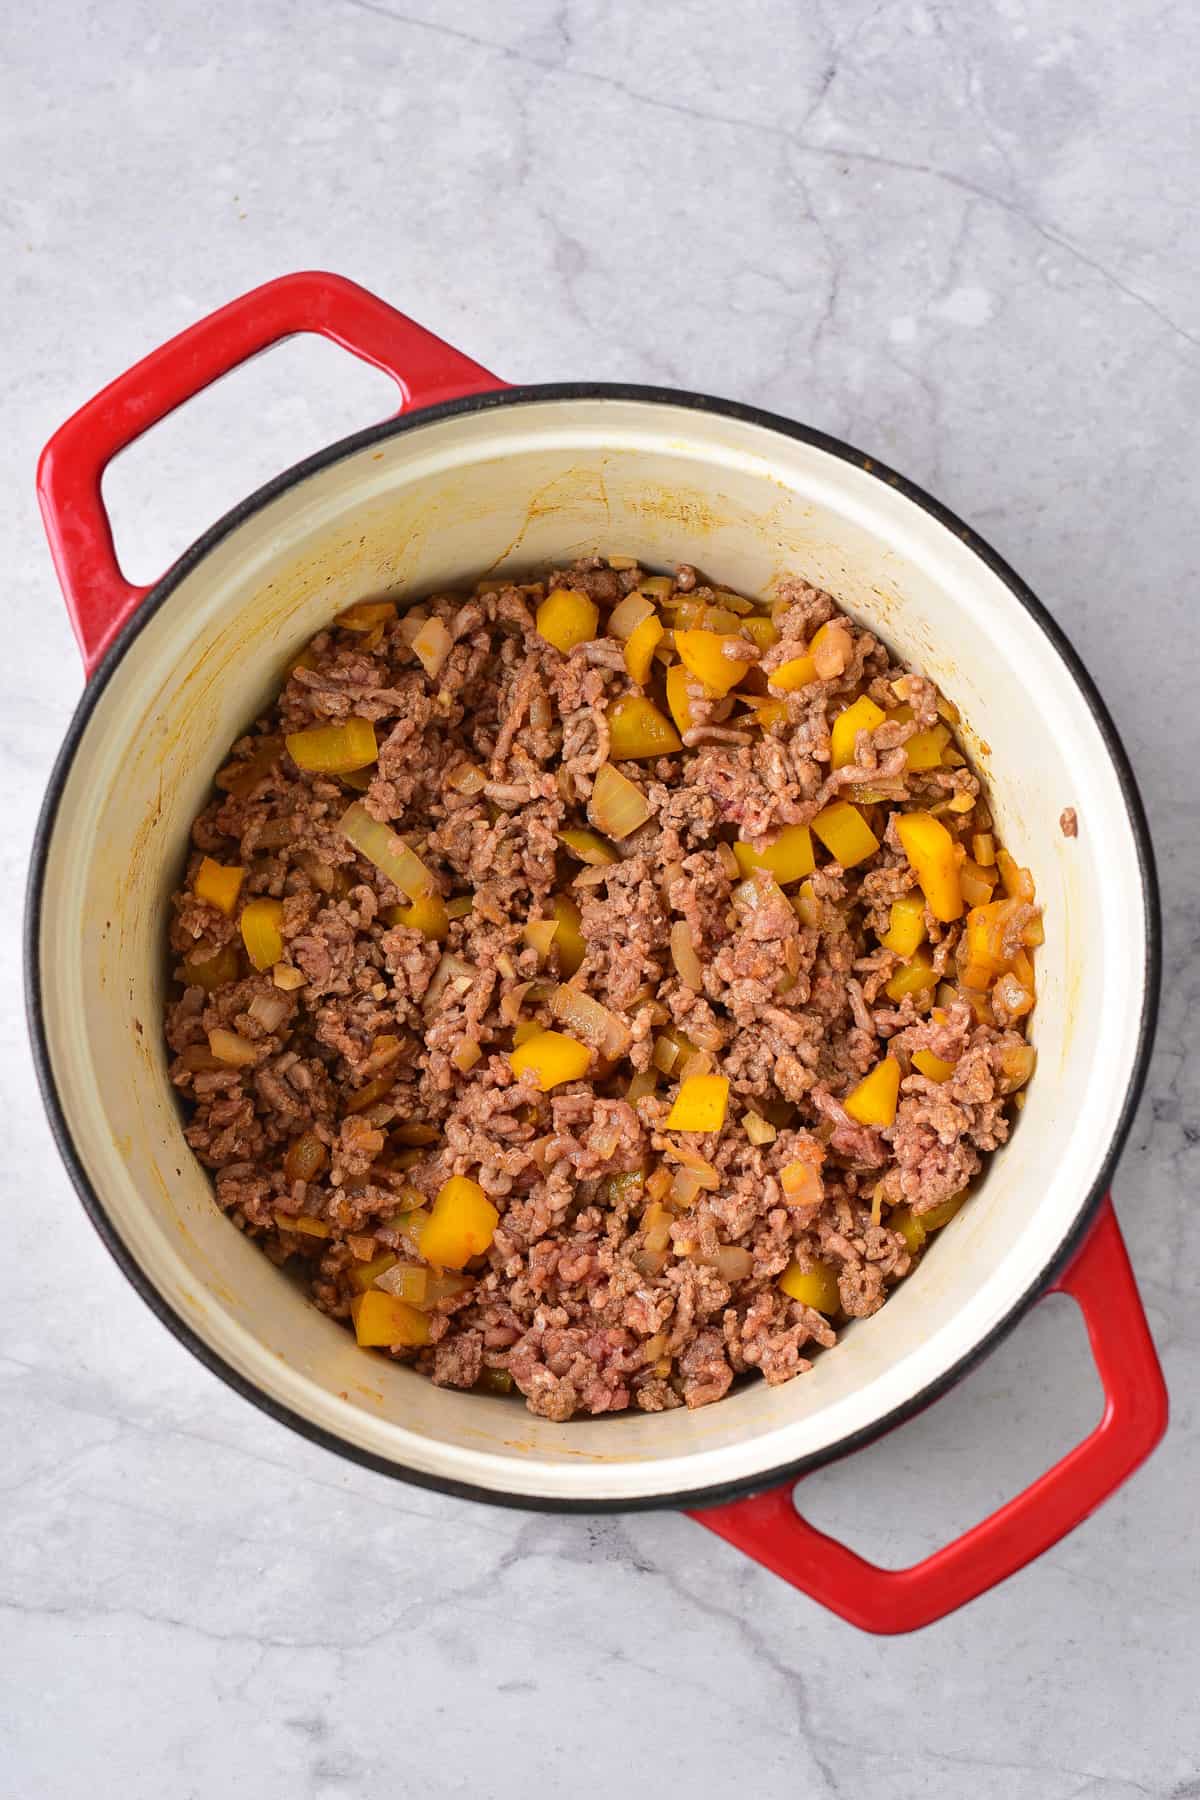 Ground beef cooked in the pot.